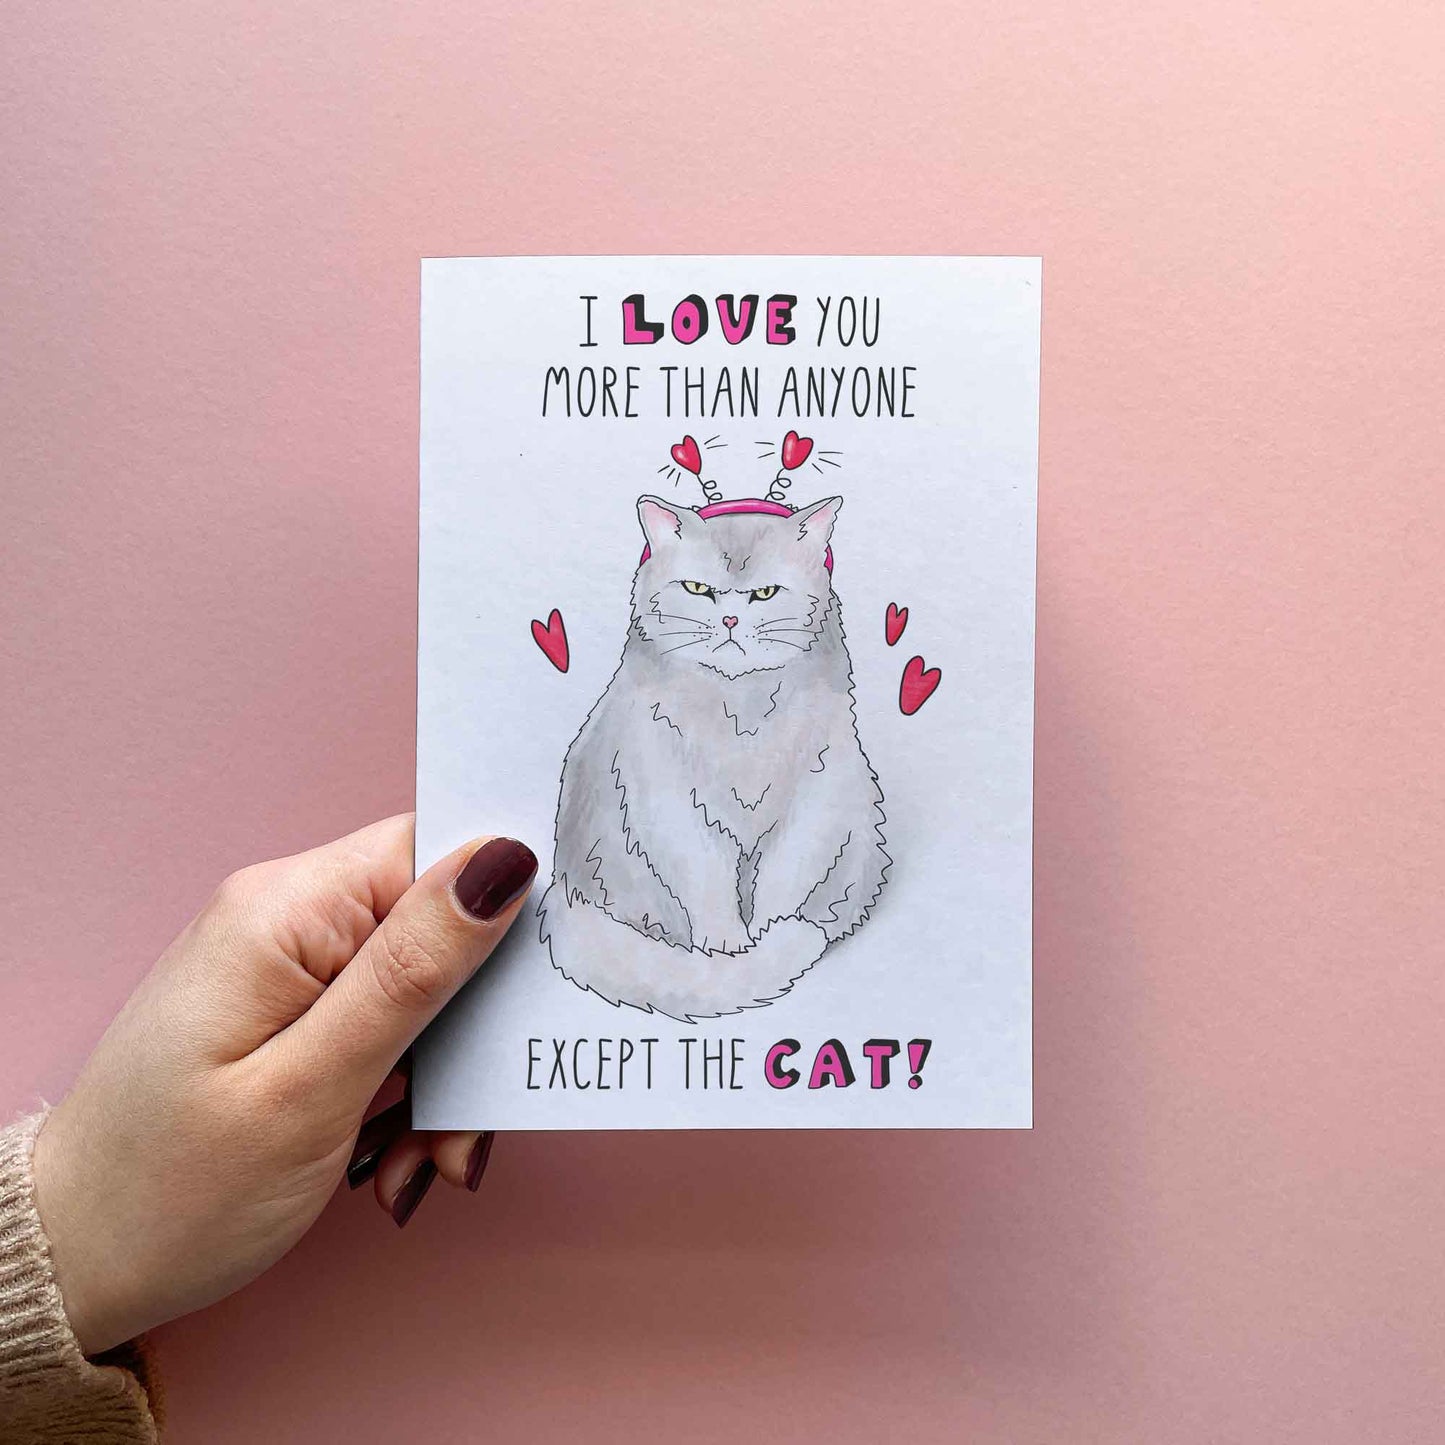 Funny Valentines card for boyfriend or girlfriend, Cat mom or dad. Reading I love you more than anyone except the cat. With illustration of a grumpy cat with red hearts. FSC certified paper card with matching red envelope.